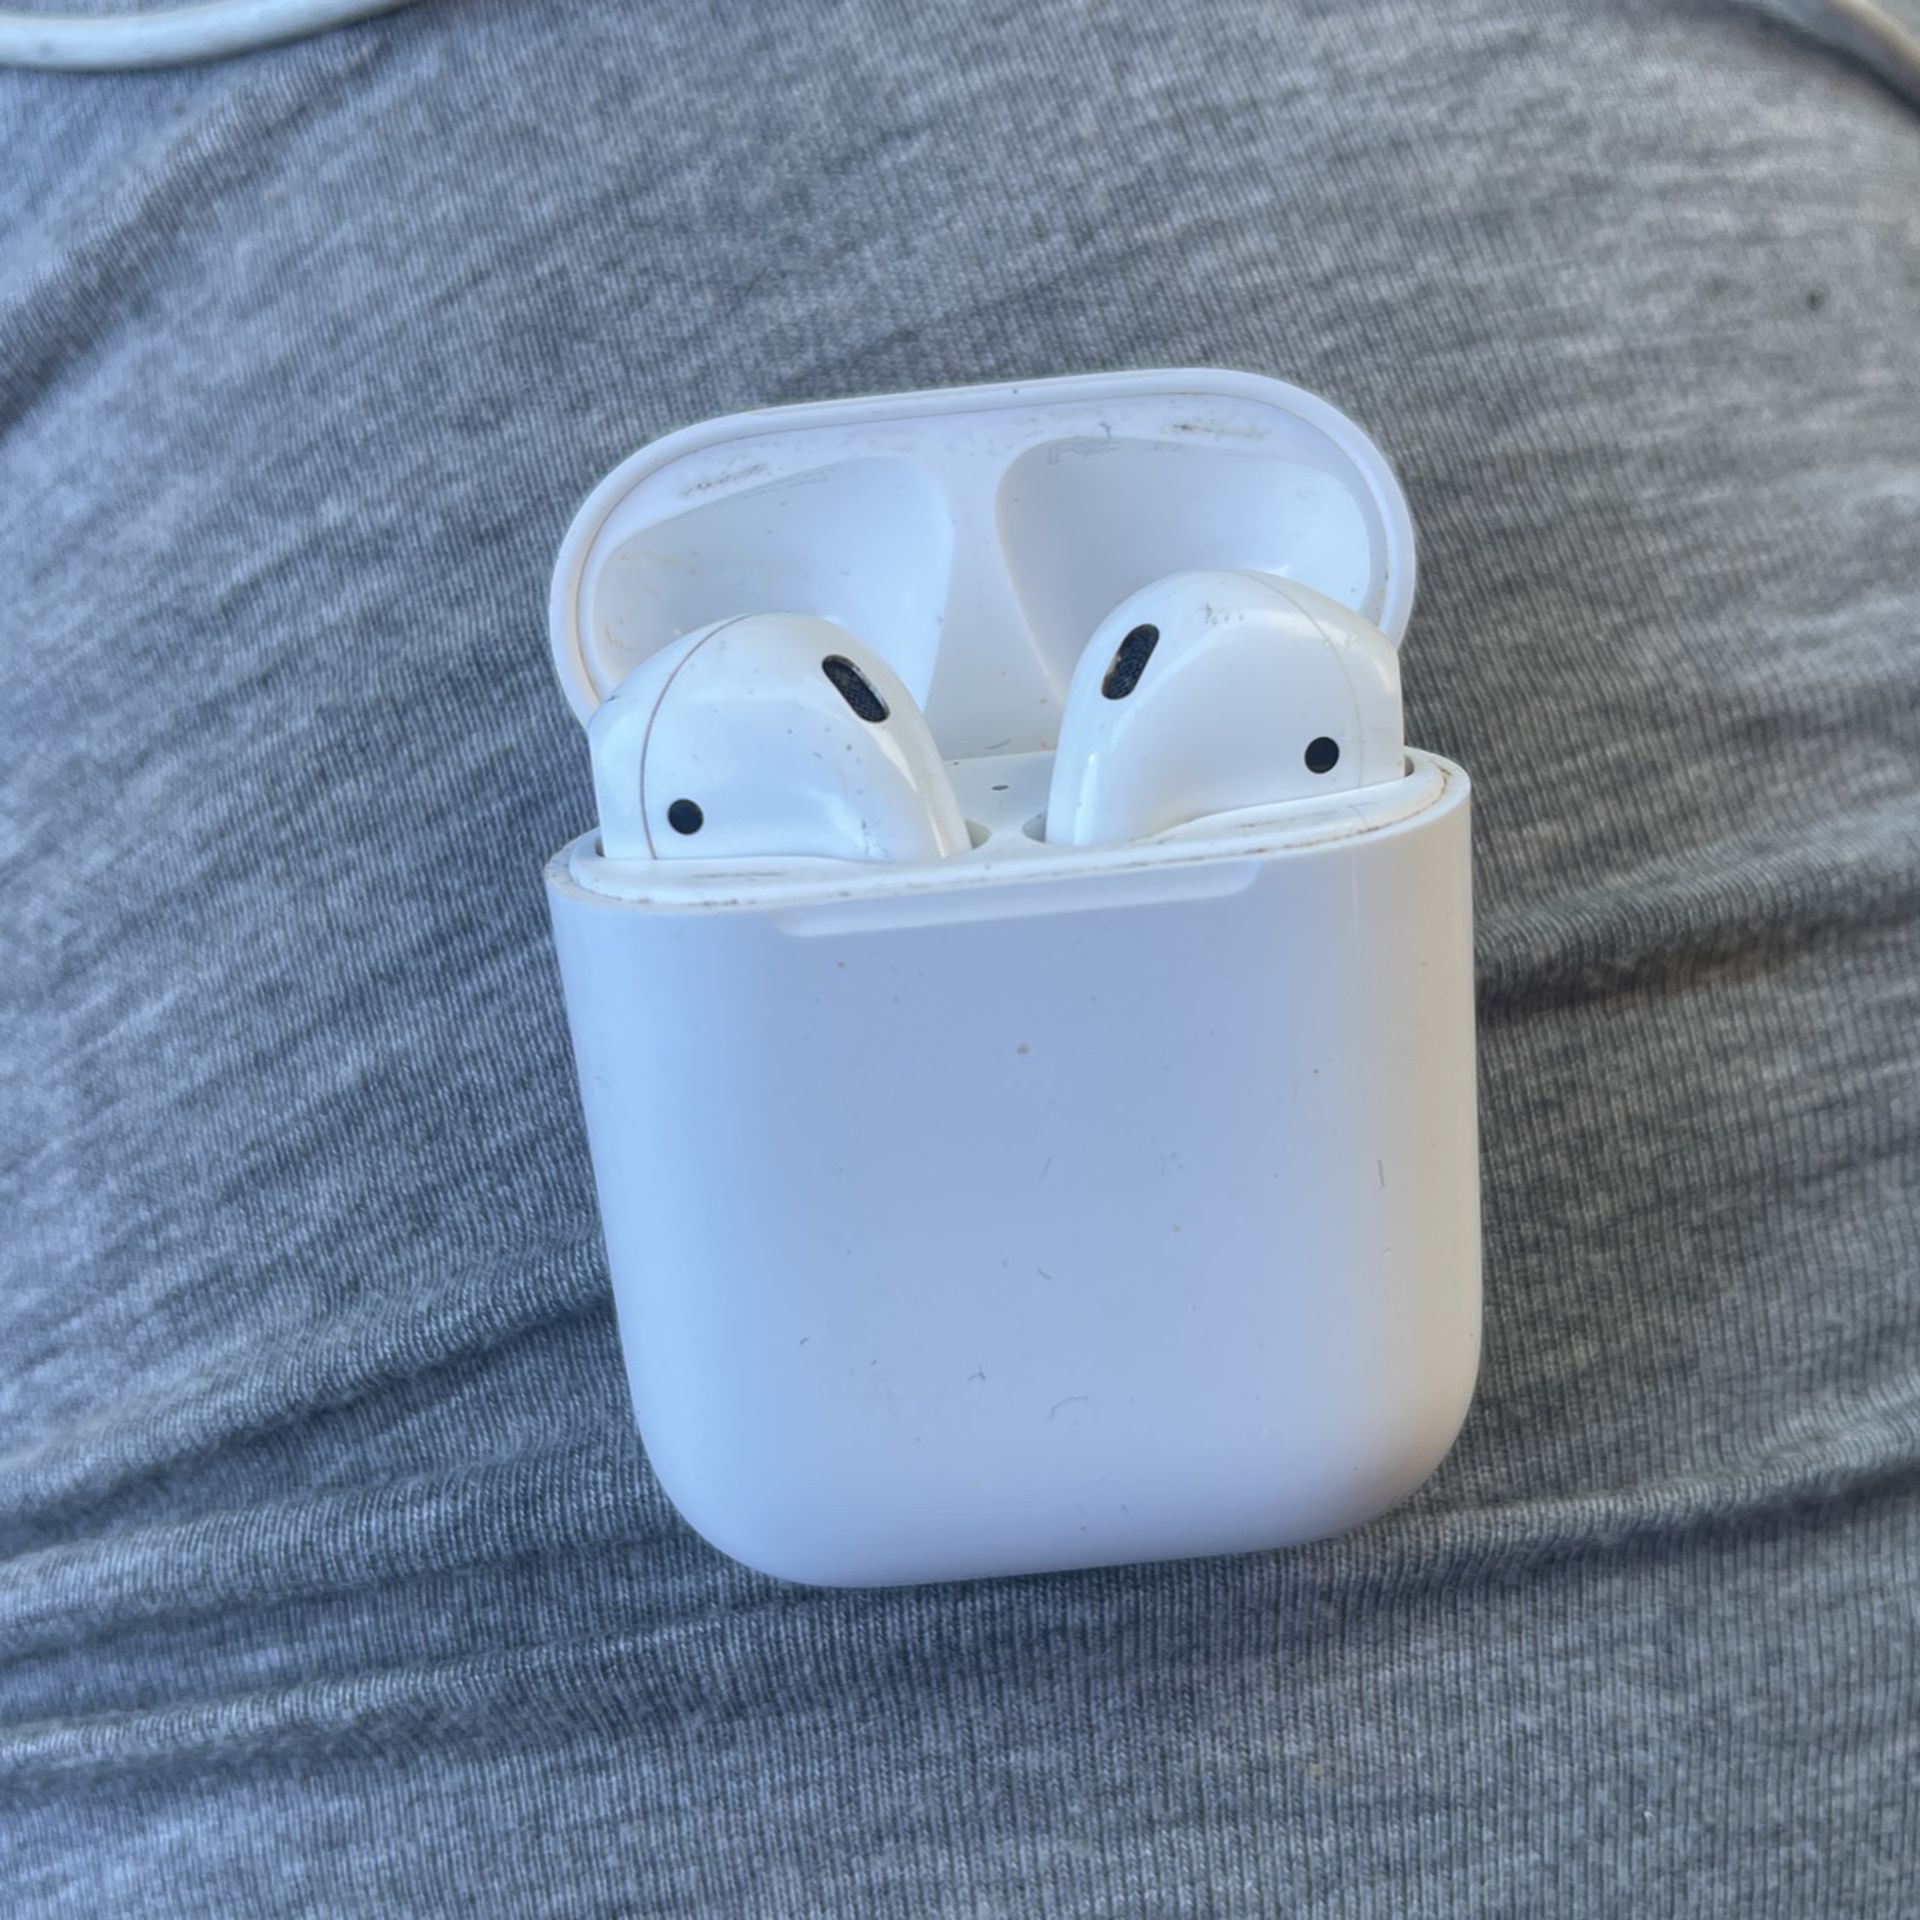 Second Generation Air Pods $100